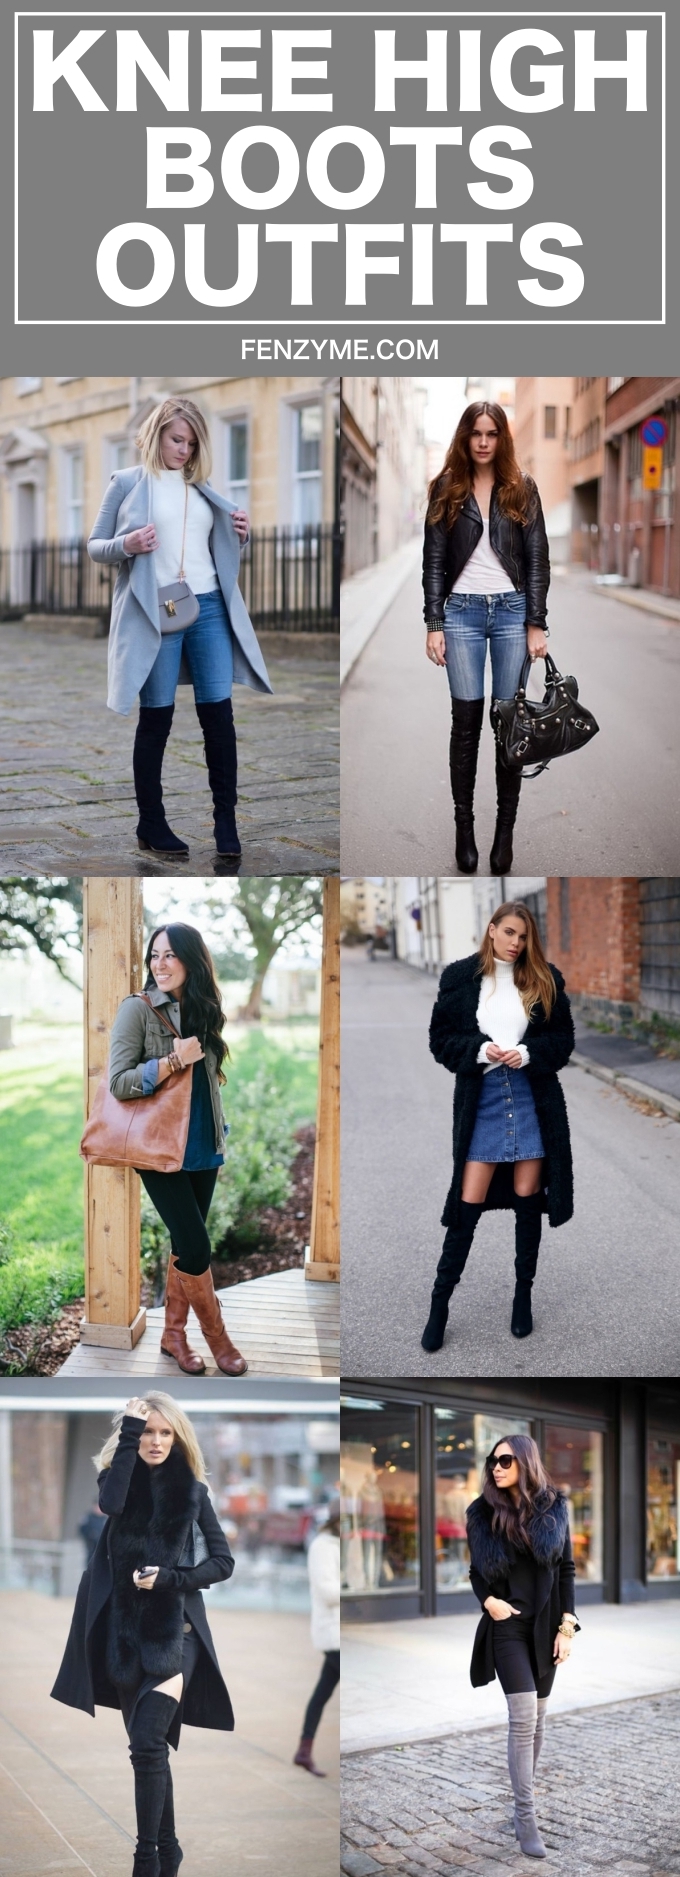 winter outfits with knee high boots